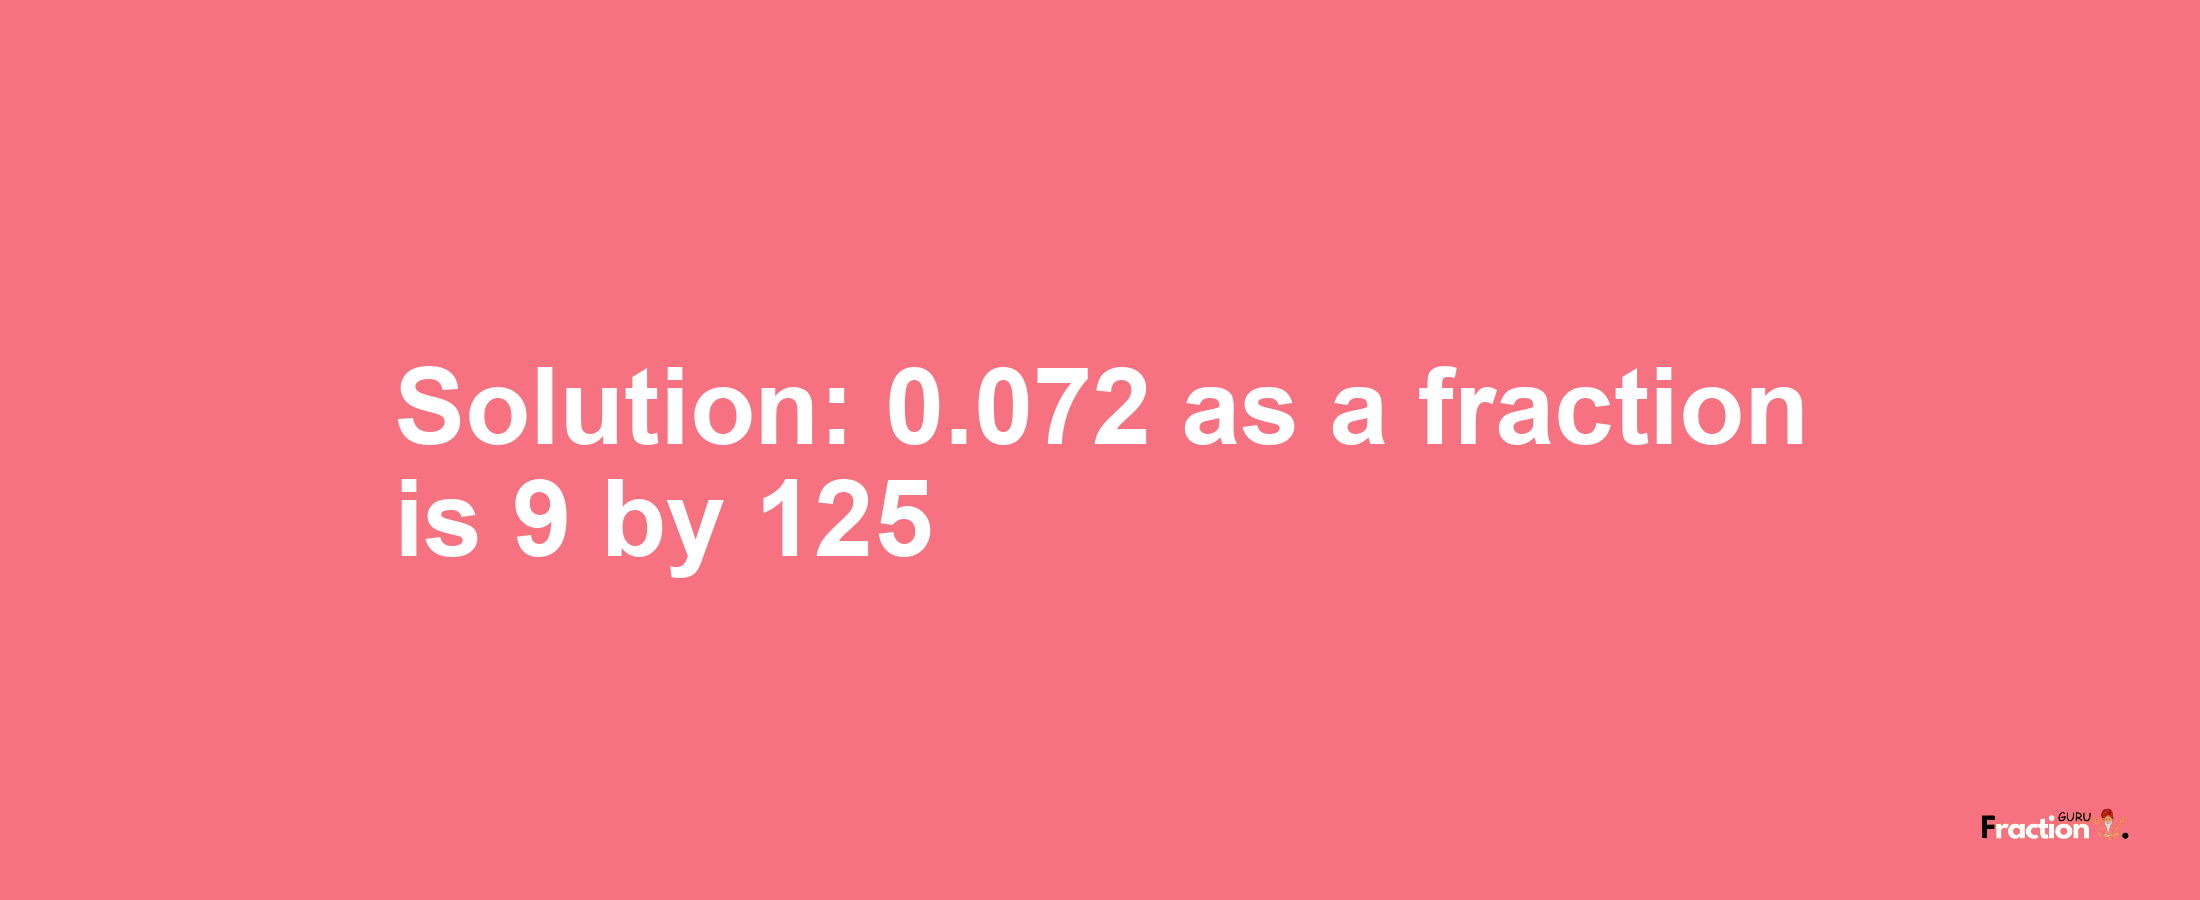 Solution:0.072 as a fraction is 9/125